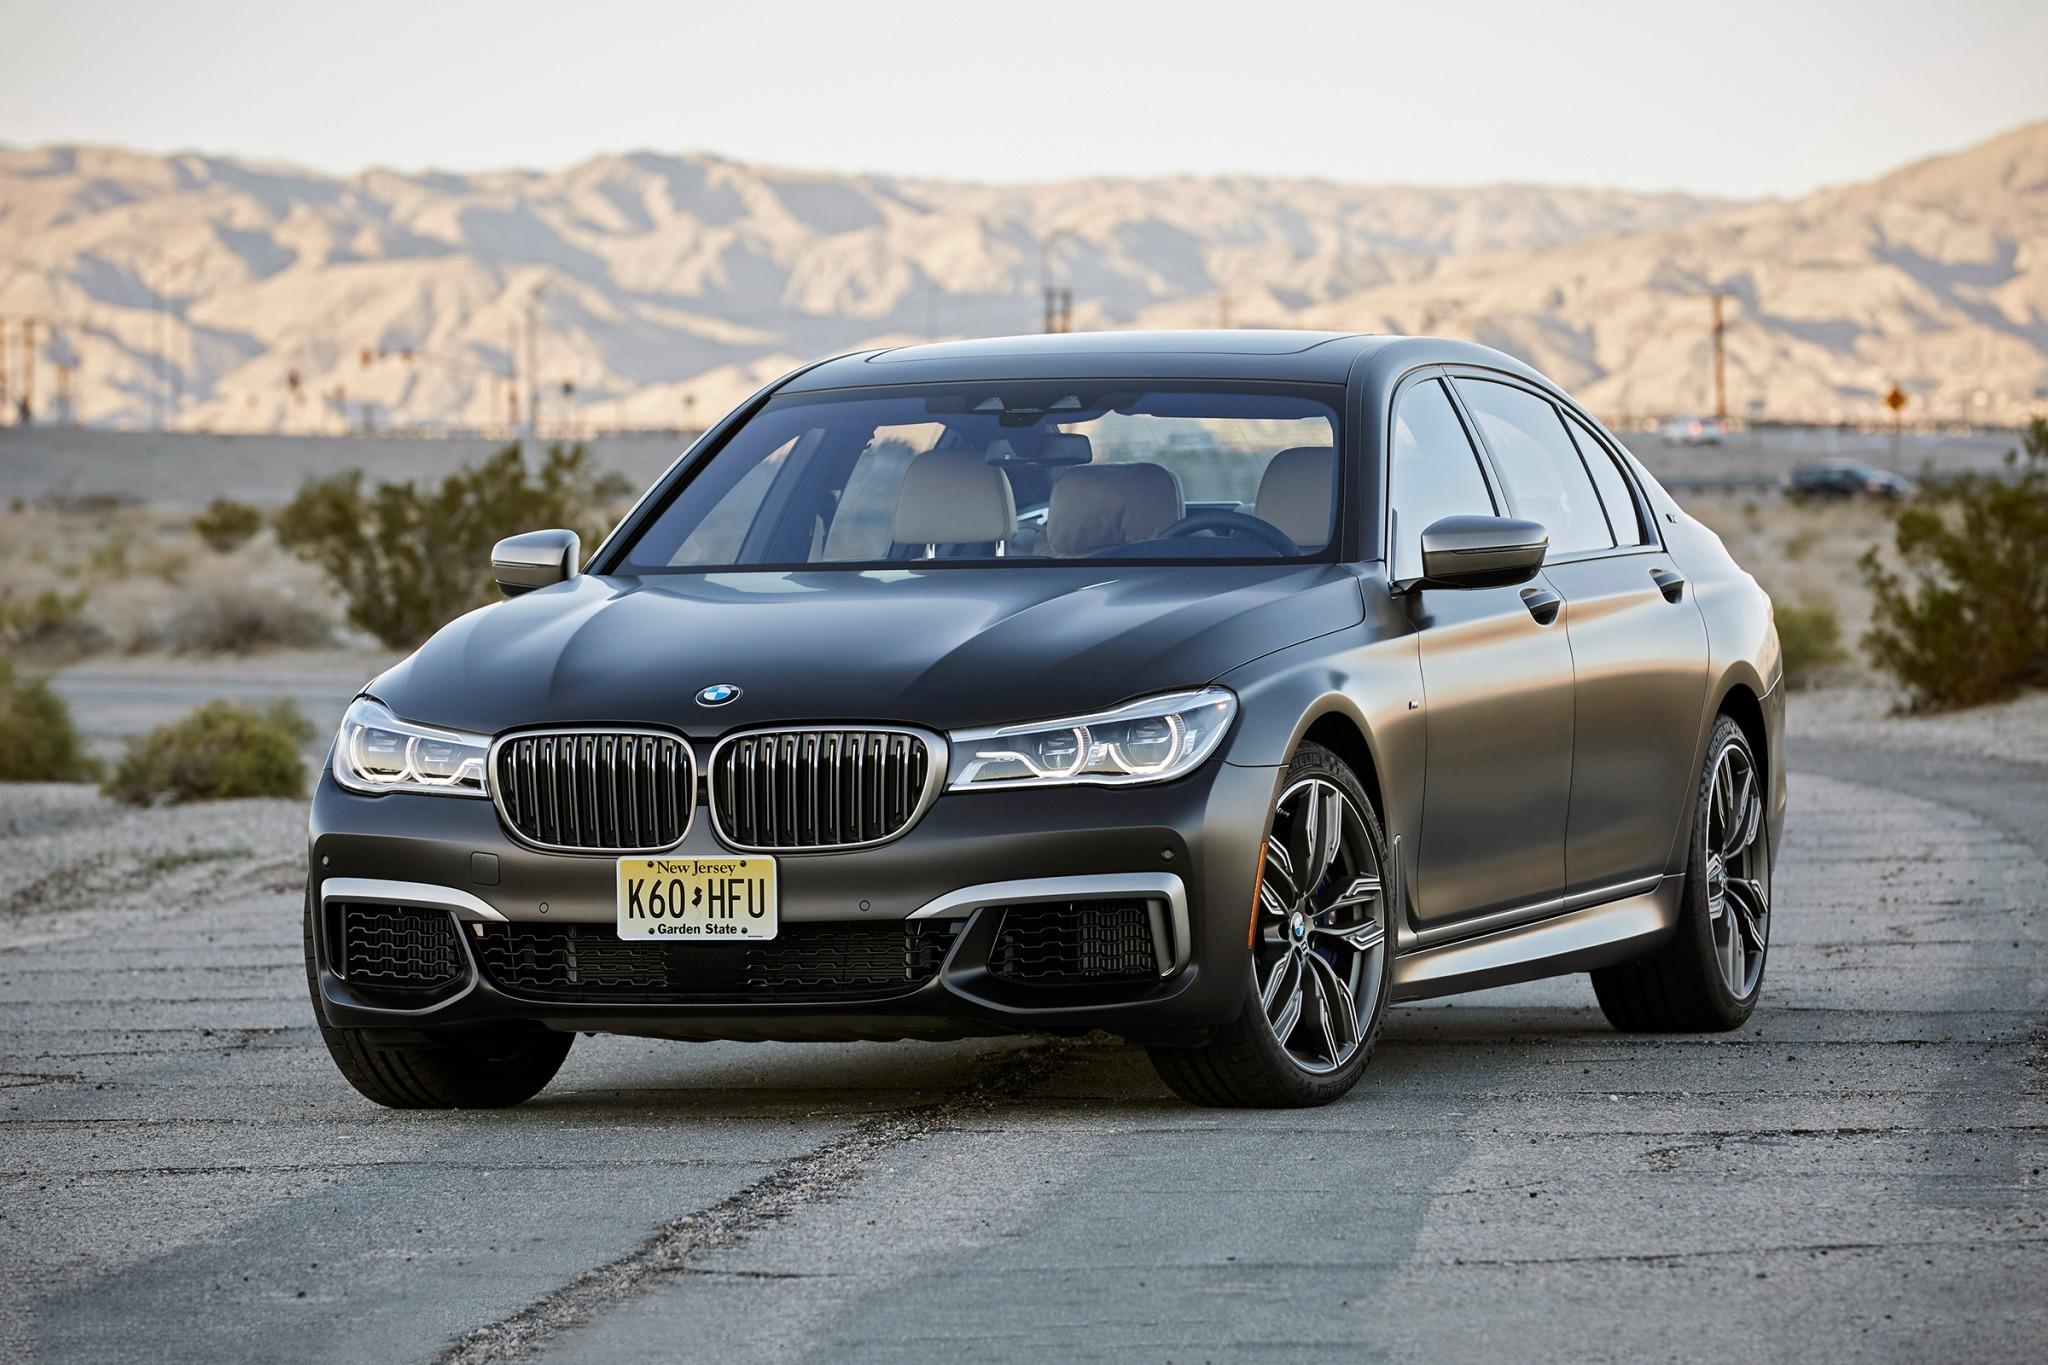 2018 BMW 7Series M760i xDrive VIN Number Search